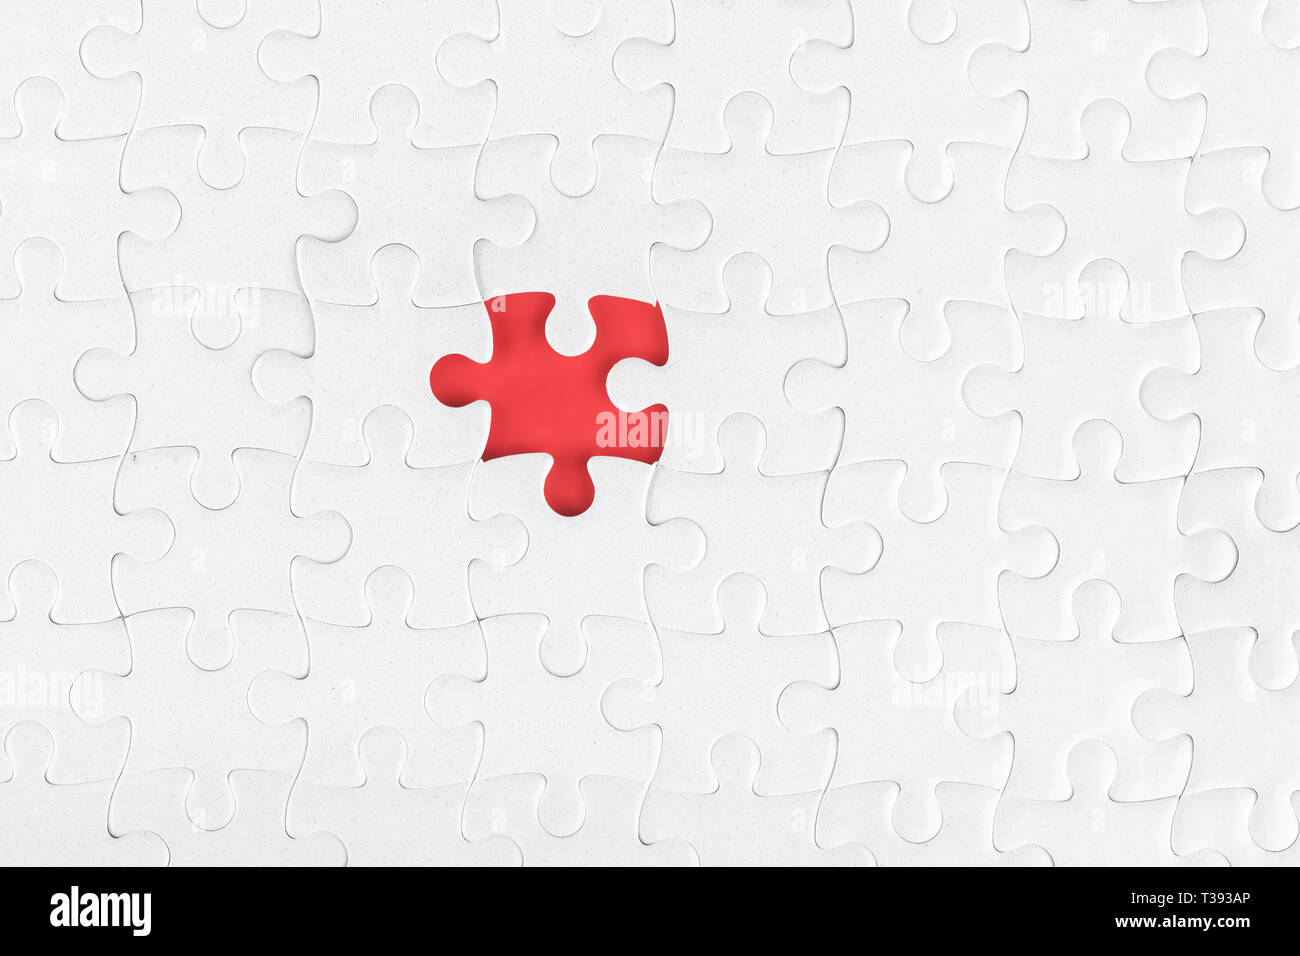 White blank jigsaw puzzle without one piece. Missing part and incompleteness theme Stock Photo